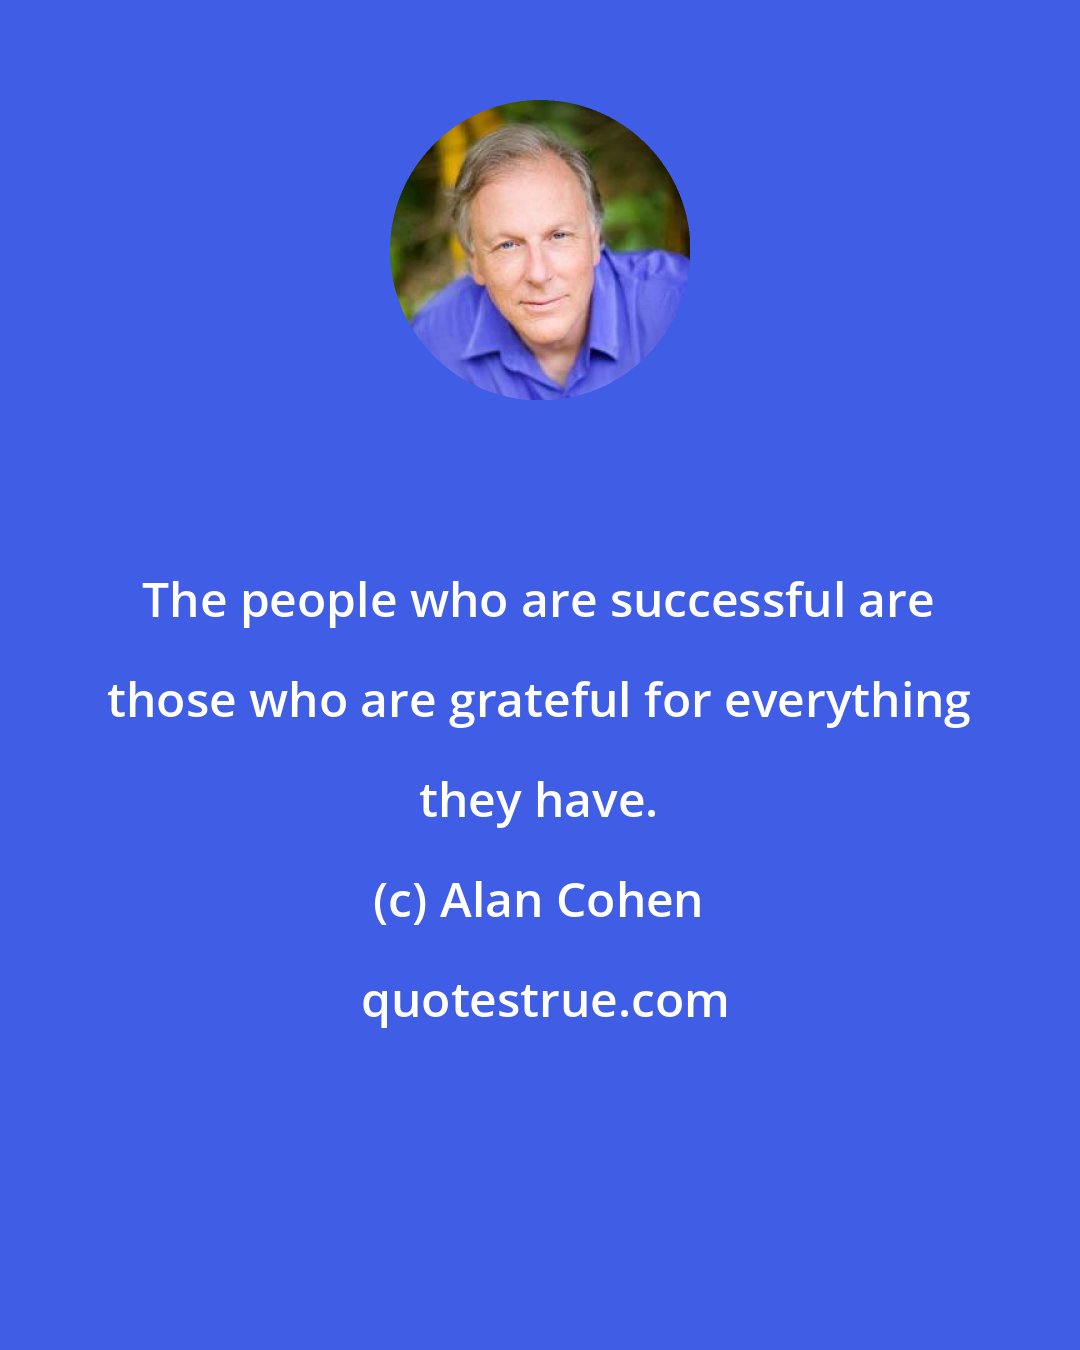 Alan Cohen: The people who are successful are those who are grateful for everything they have.